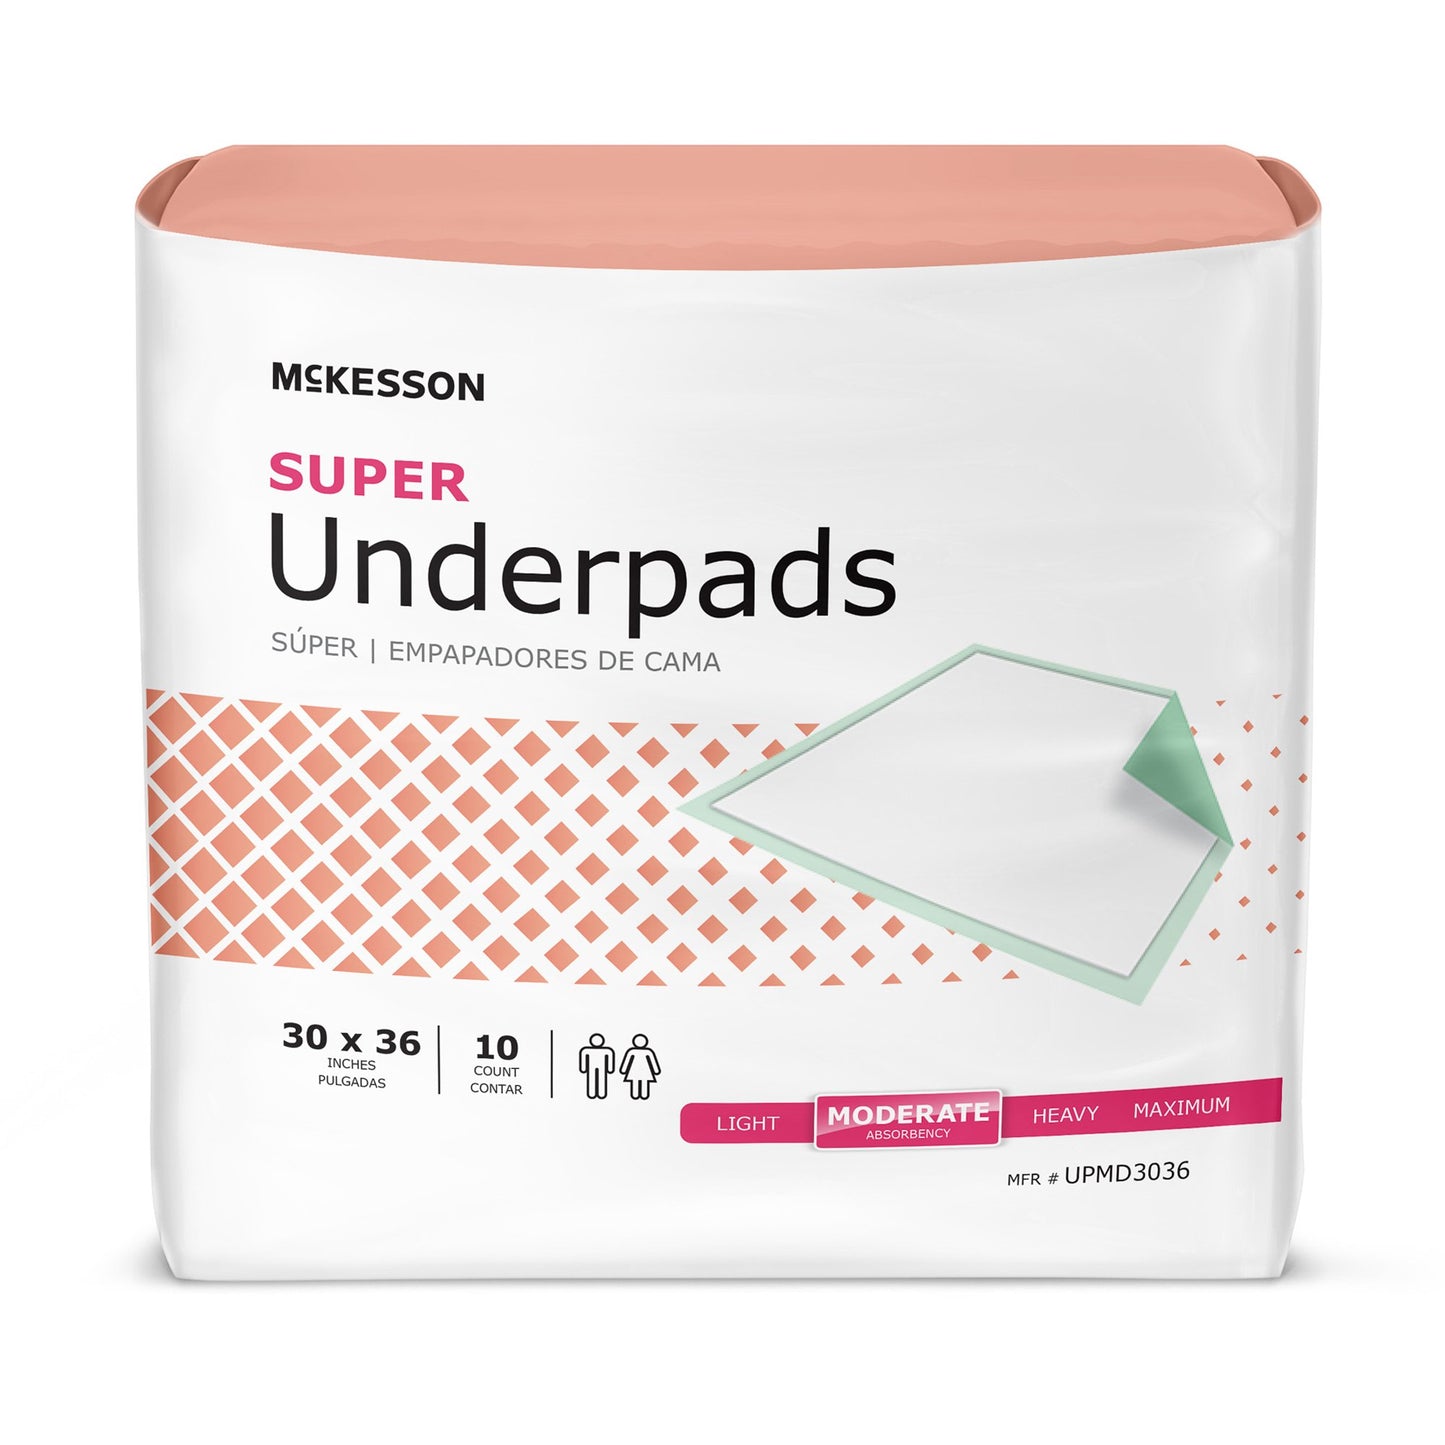 McKesson Super Moderate Absorbency Underpad, 30 x 36 Inch, 10 ct